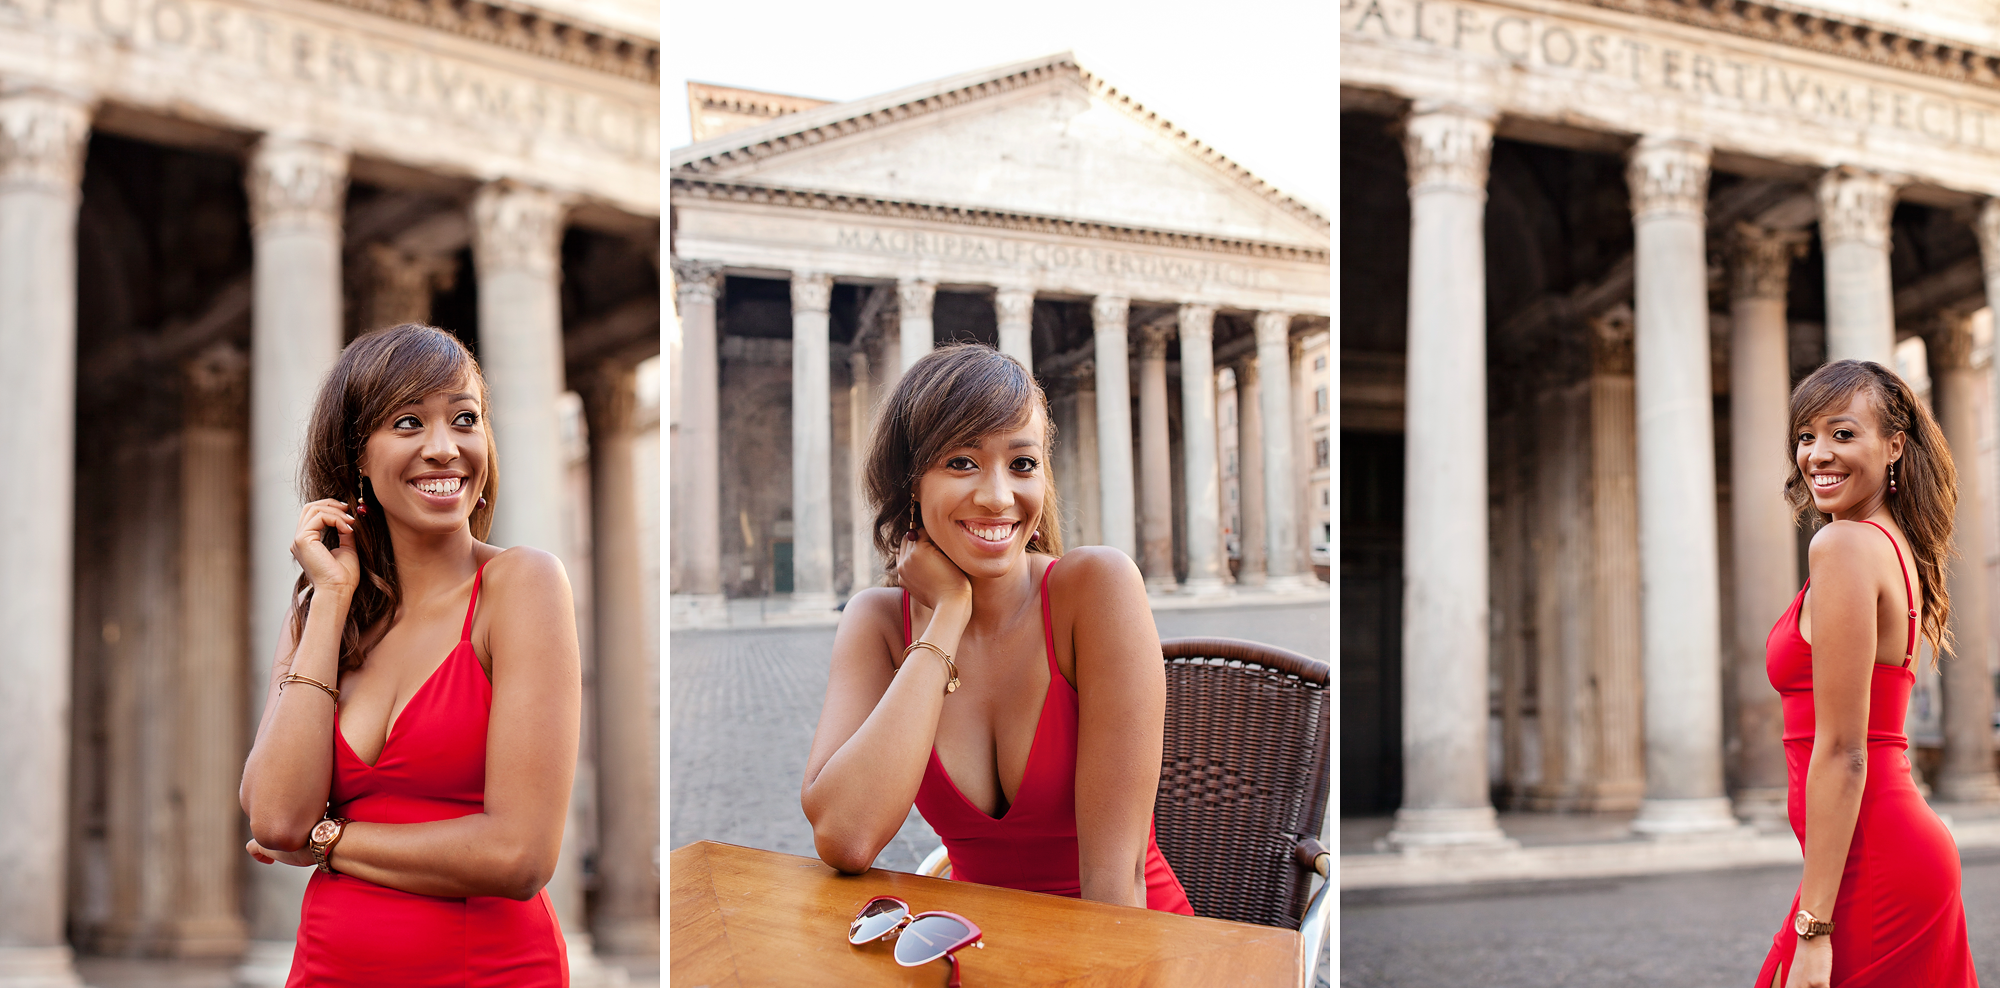 Honeymoon, vacation, family, engagement, maternity, love story individual and solo photoshoots in Rome, Italy by photographer Tricia Anne Photography | Rome Photographer, vacation, tripadvisor, instagram, fun, married, love, story, photography, session, photoshoot, wedding photographer, vacation photographer, engagement photo, honeymoon photoshoot, rome honeymoon, rome wedding, Pantheon, honeymoon photographer rome, Rome Solo Photo shoot, Rome Photography, Trevi Fountain, Solo trip to Rome, What to do in Rome, Solo traveler, Colosseum photo shoot